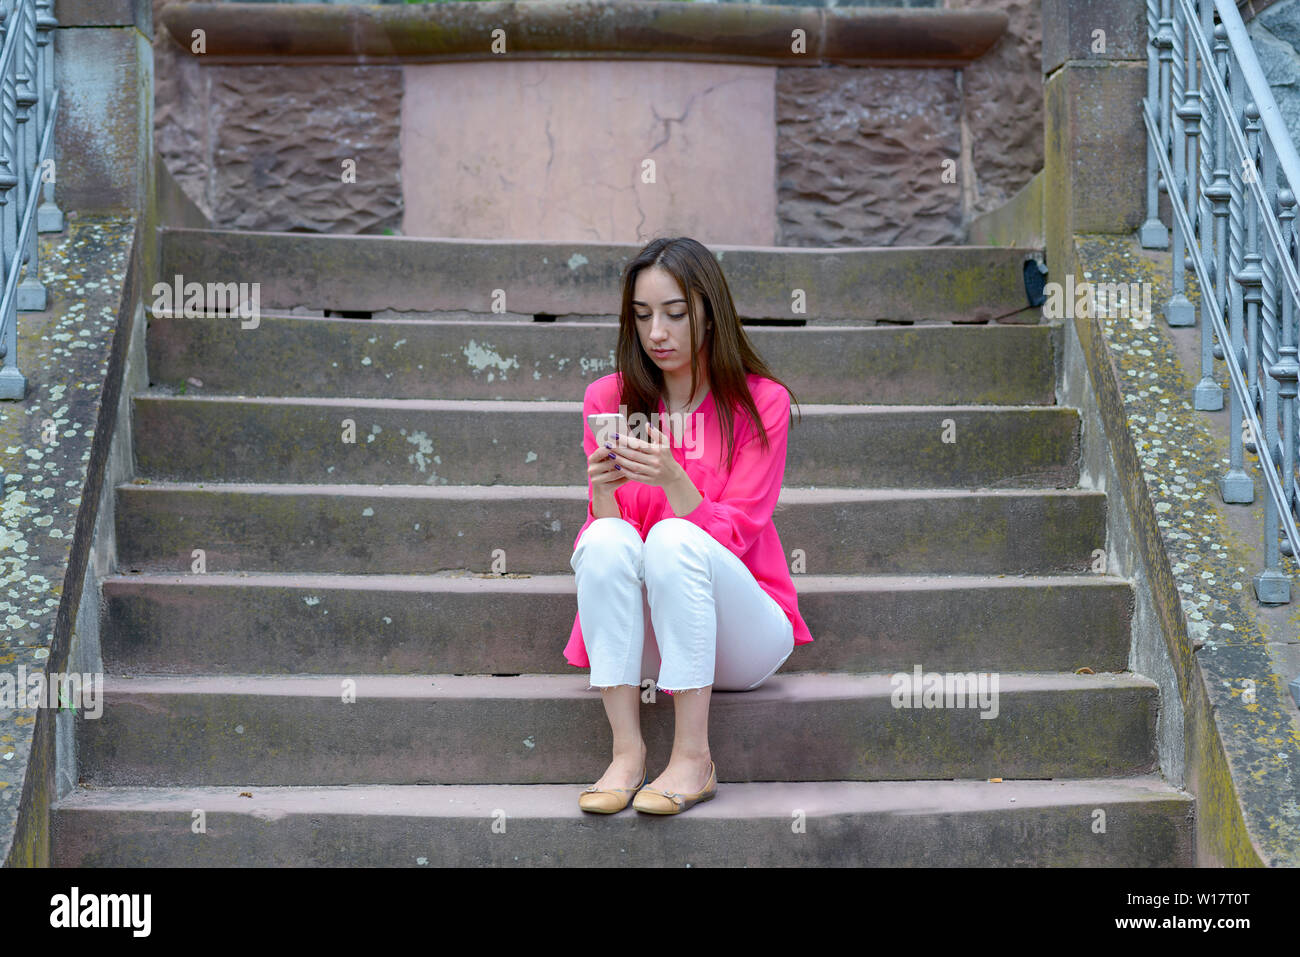 Young woman sitting on exterior cement steps using her mobile phone engrossed in reading a message Stock Photo